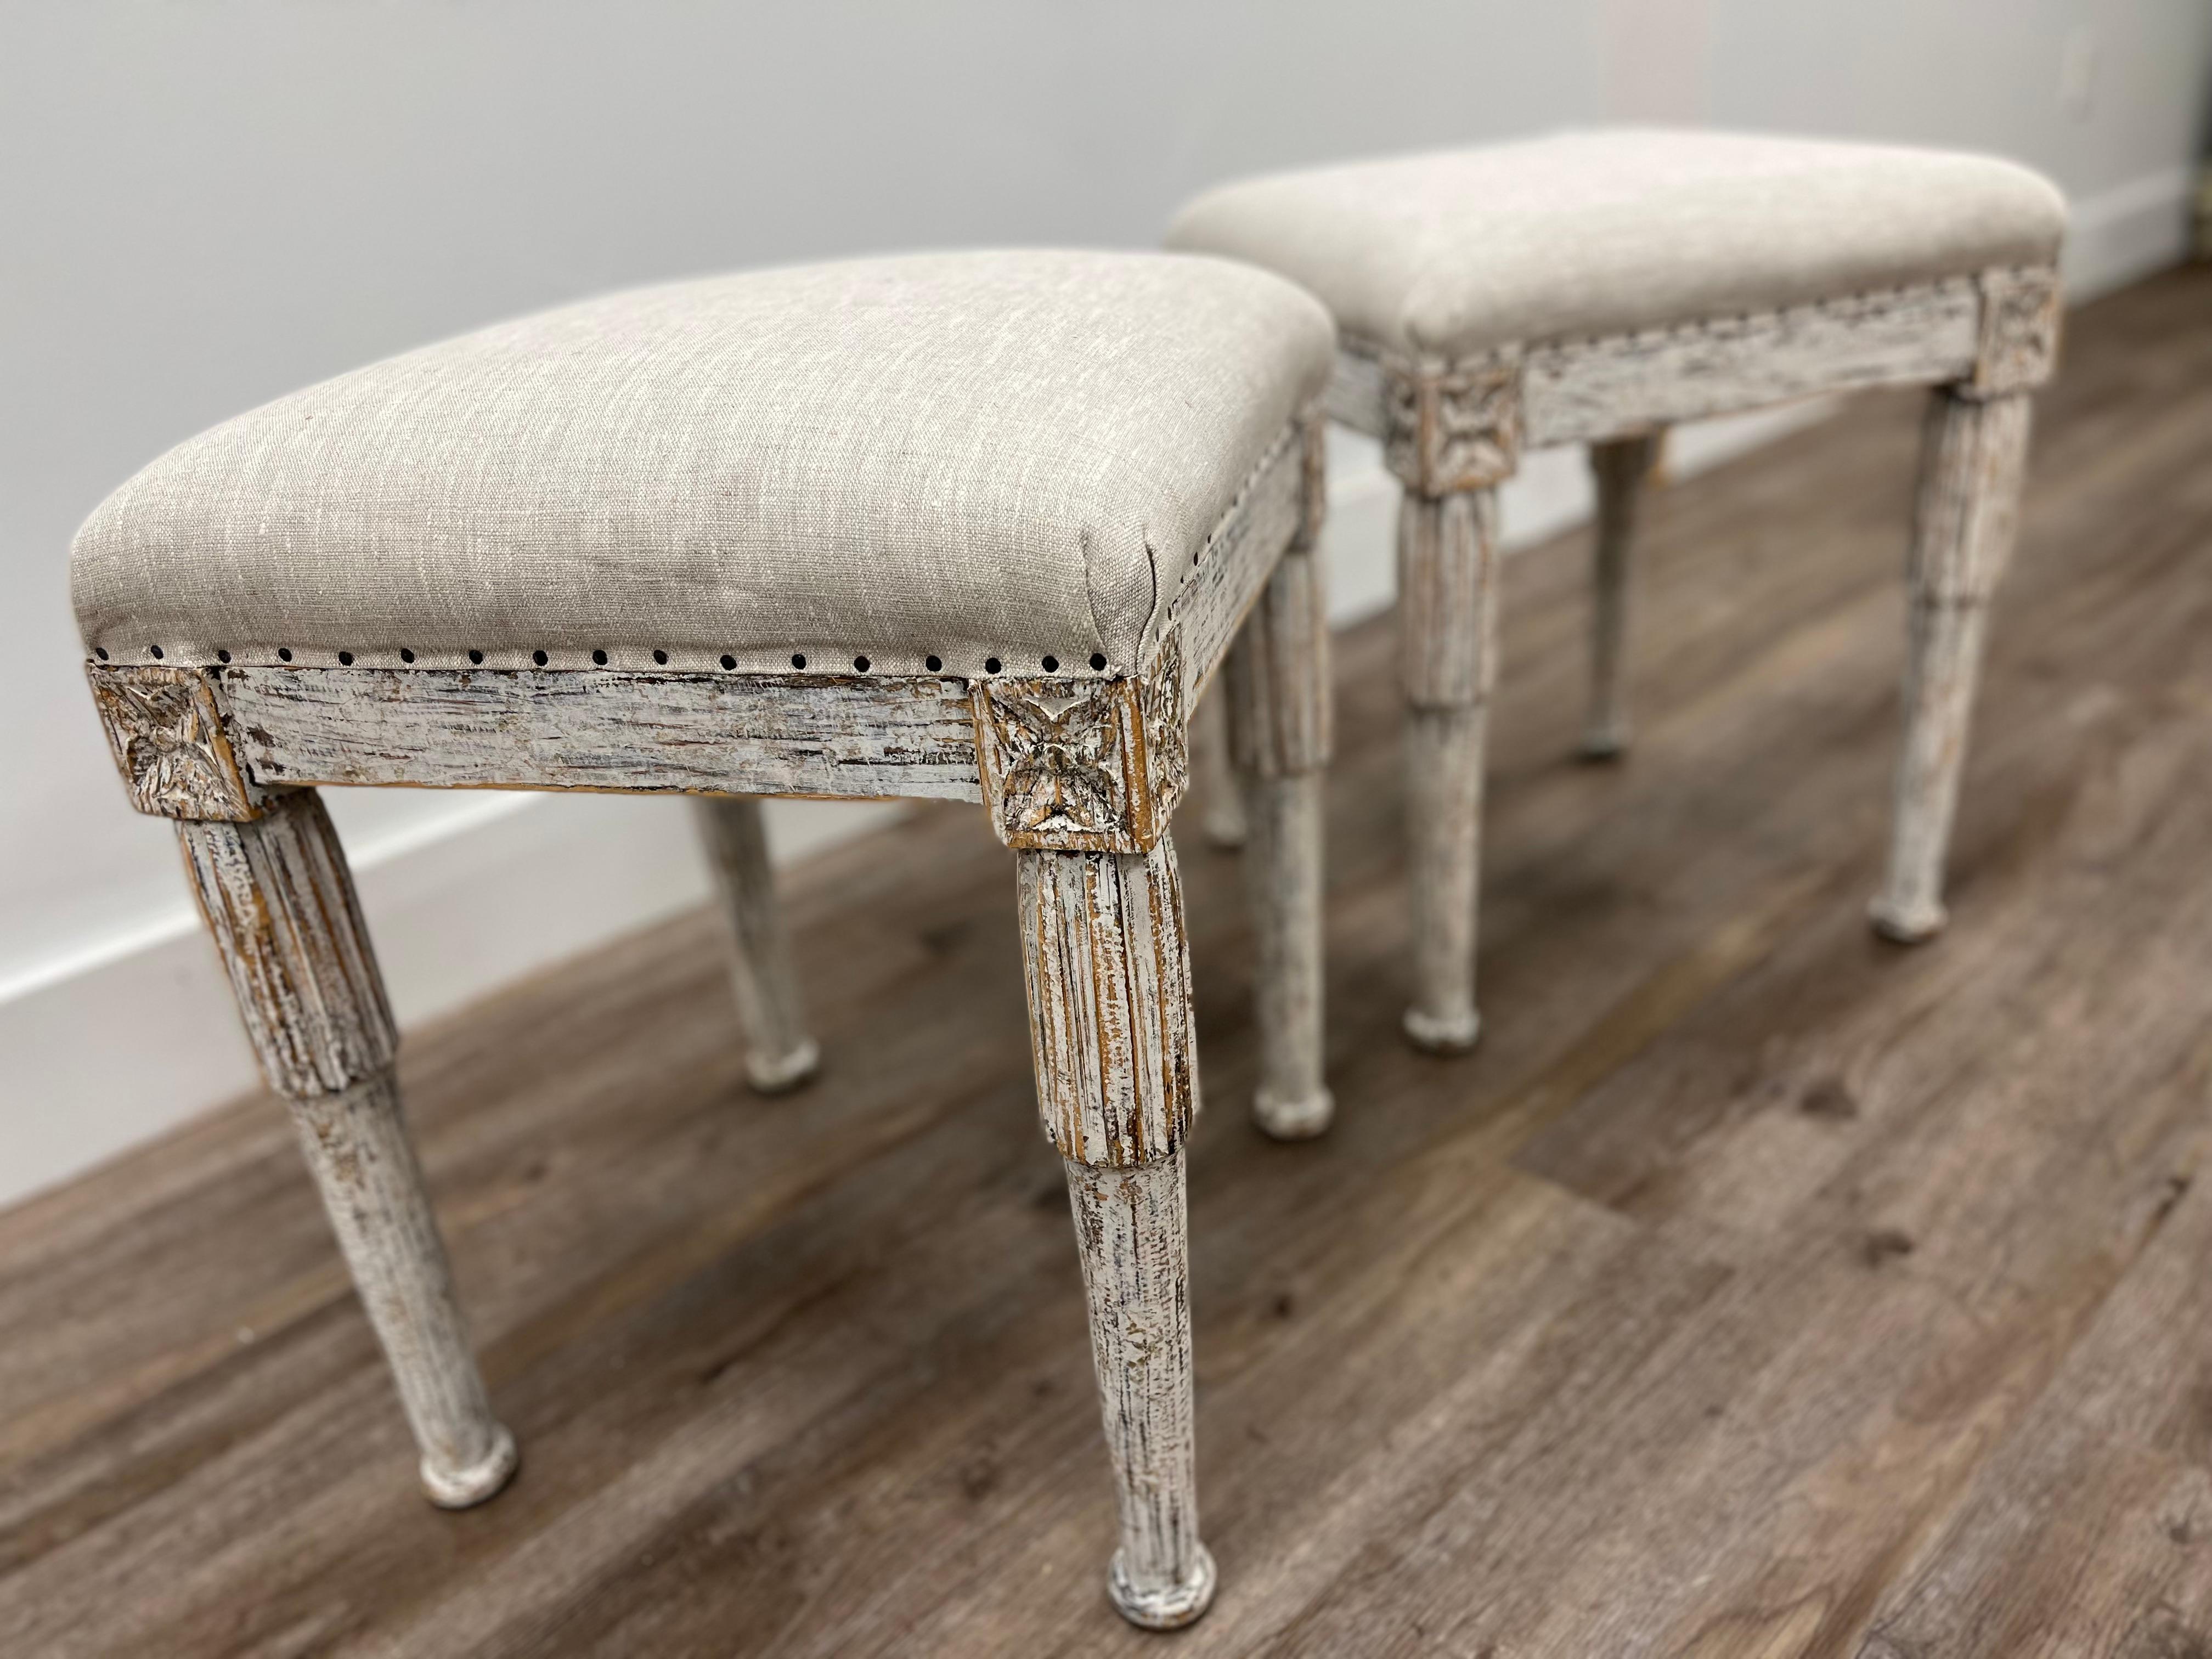 A pair of 19th century Swedish Gustavian style foot stools with detailed fleurons on the corners. The leg tops are finished with vertical reeded over-collaring atop turned and slightly tapered bases. Repainted and newly reupholstered in linen. 